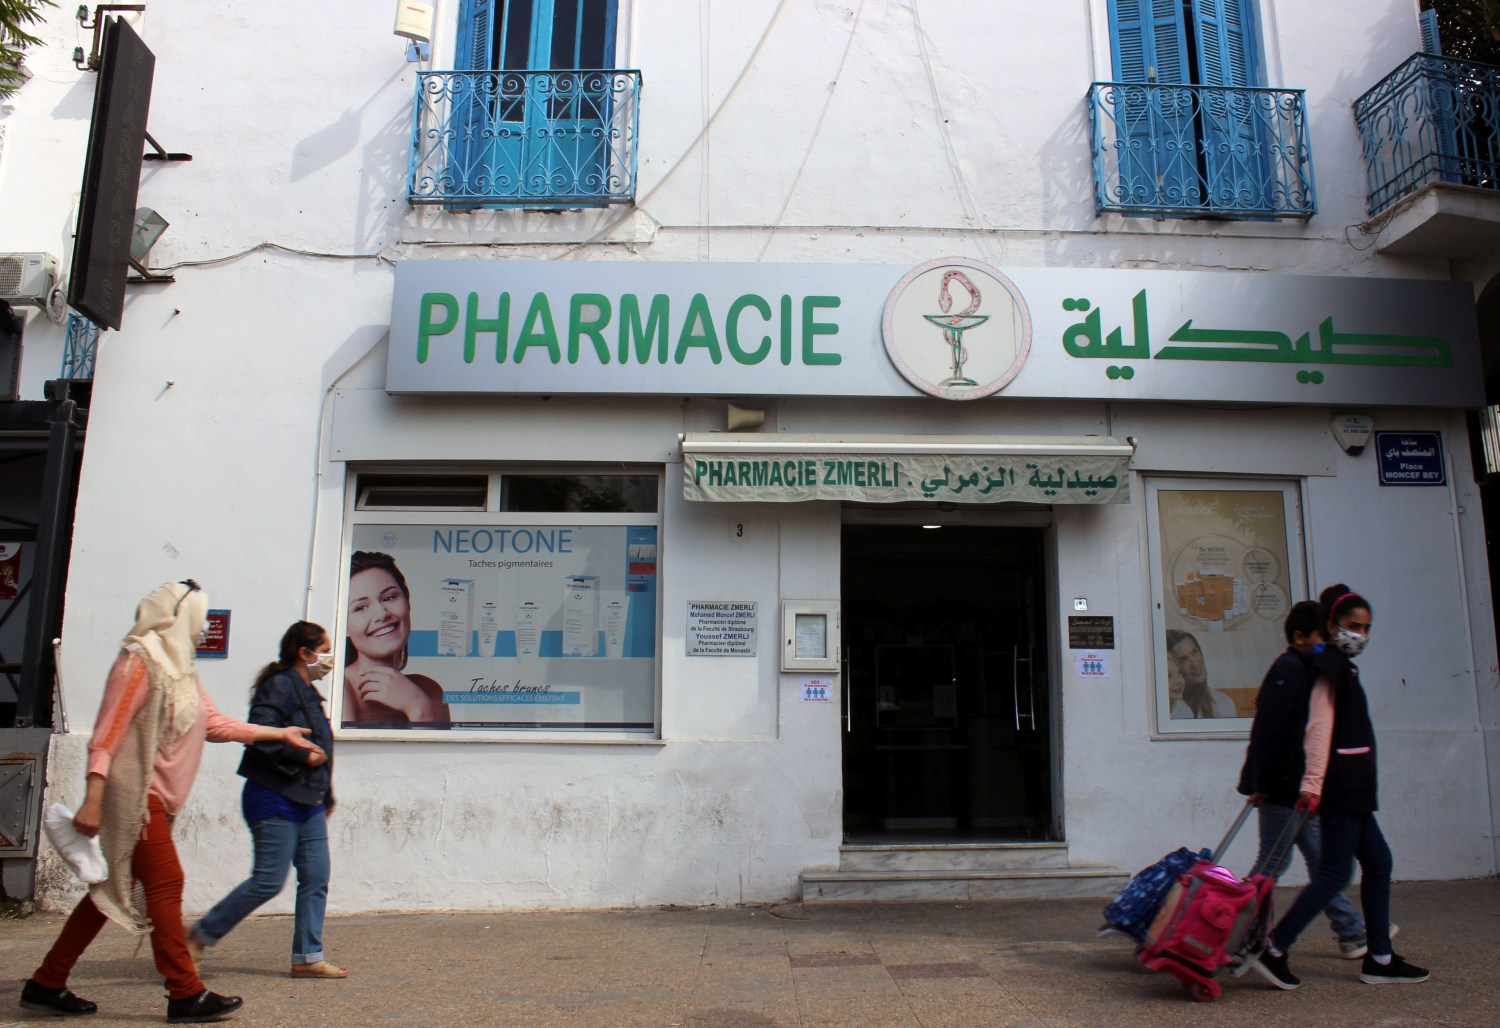 People, wearing masks against the coronavirus, walk past a pharmacy, amid concerns over the spread of COVID-19 in Tunis, Tunisia October 7, 2020.REUTERS/Angus McDowall